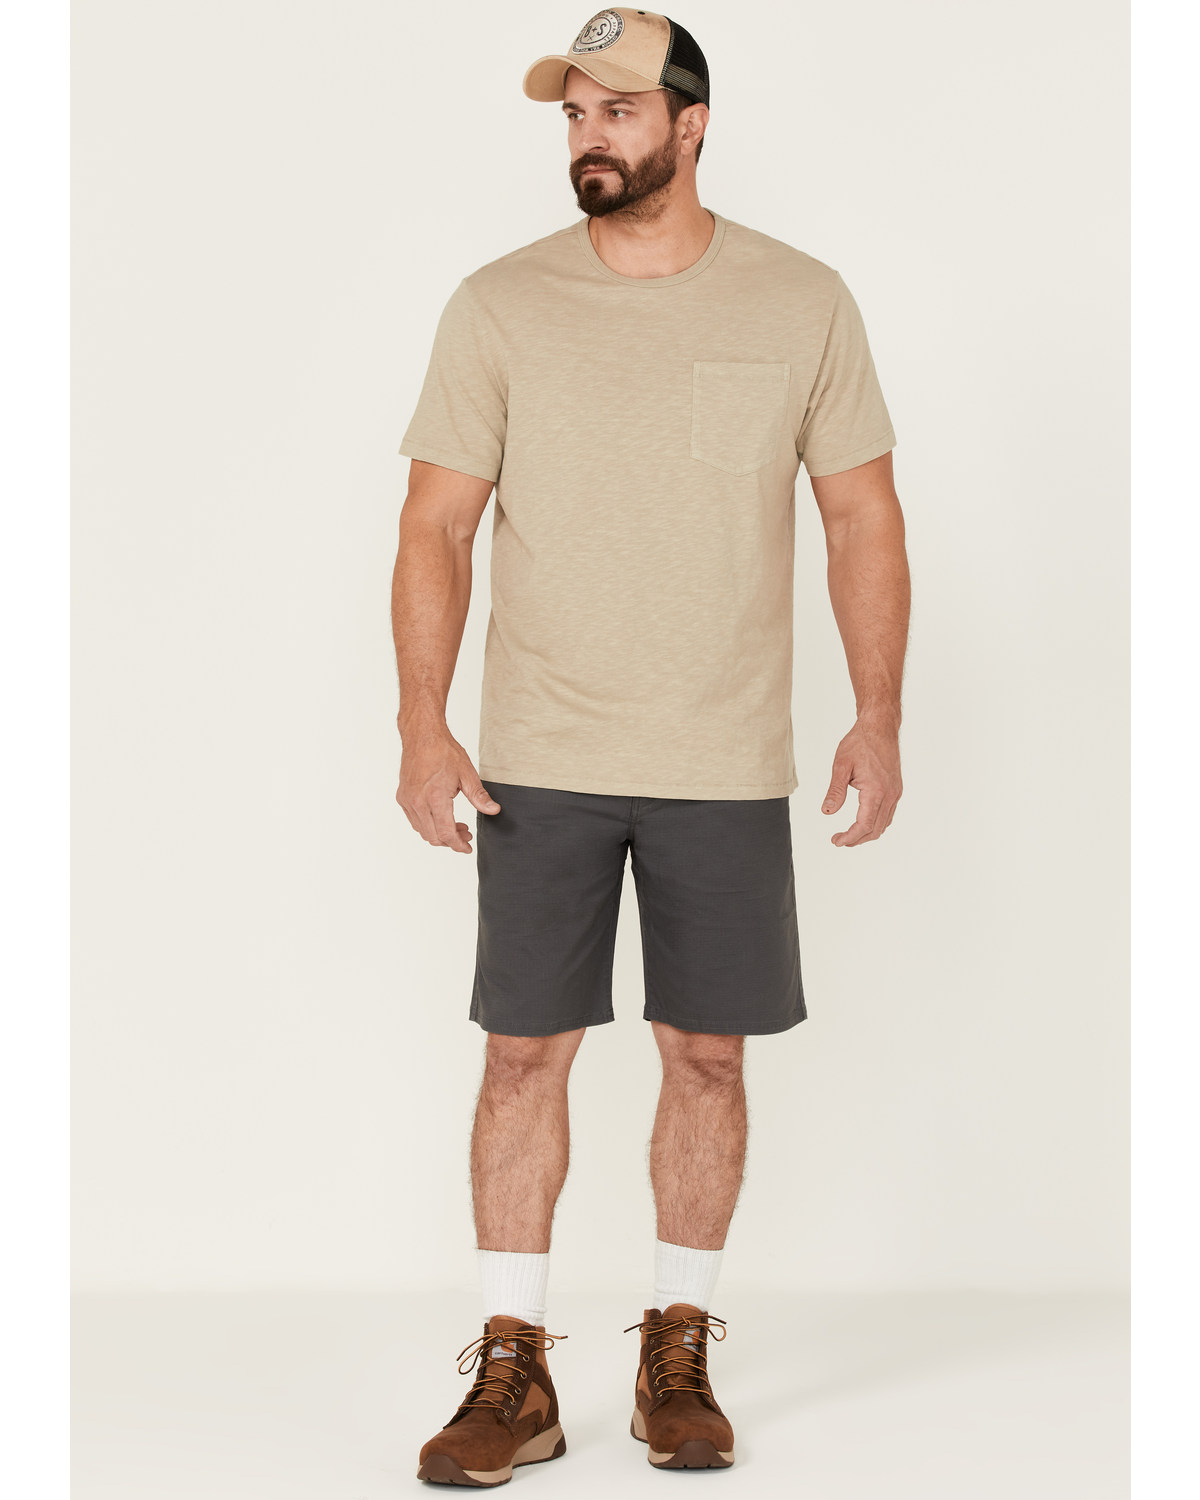 Brothers and Sons Men's Weathered Ripstop Stretch Slim Shorts